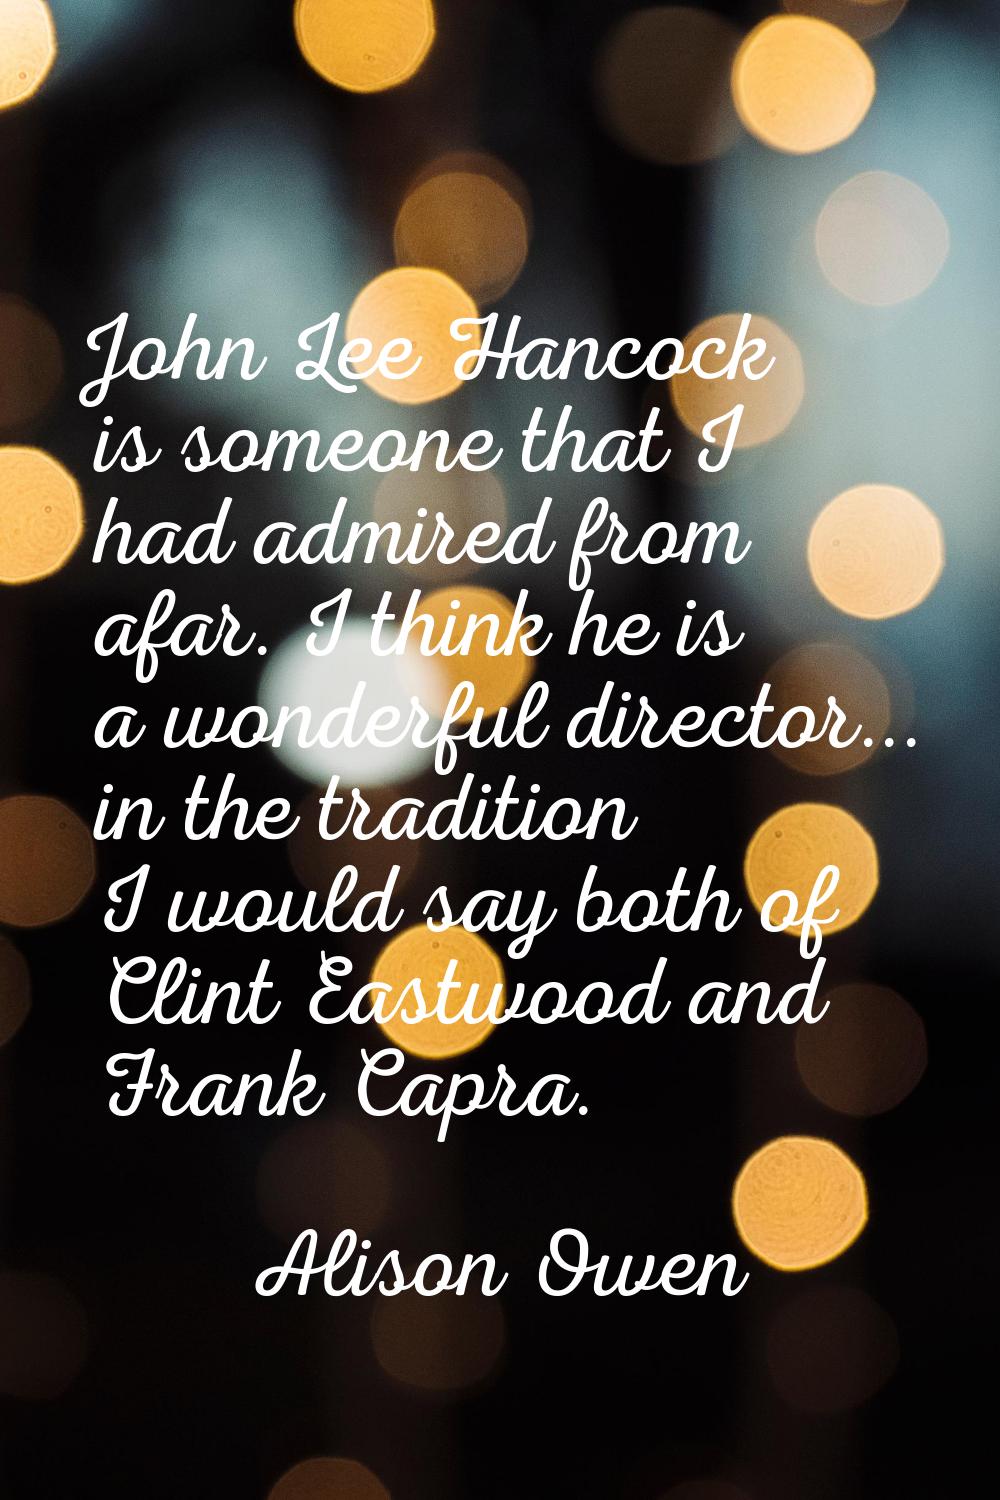 John Lee Hancock is someone that I had admired from afar. I think he is a wonderful director... in 